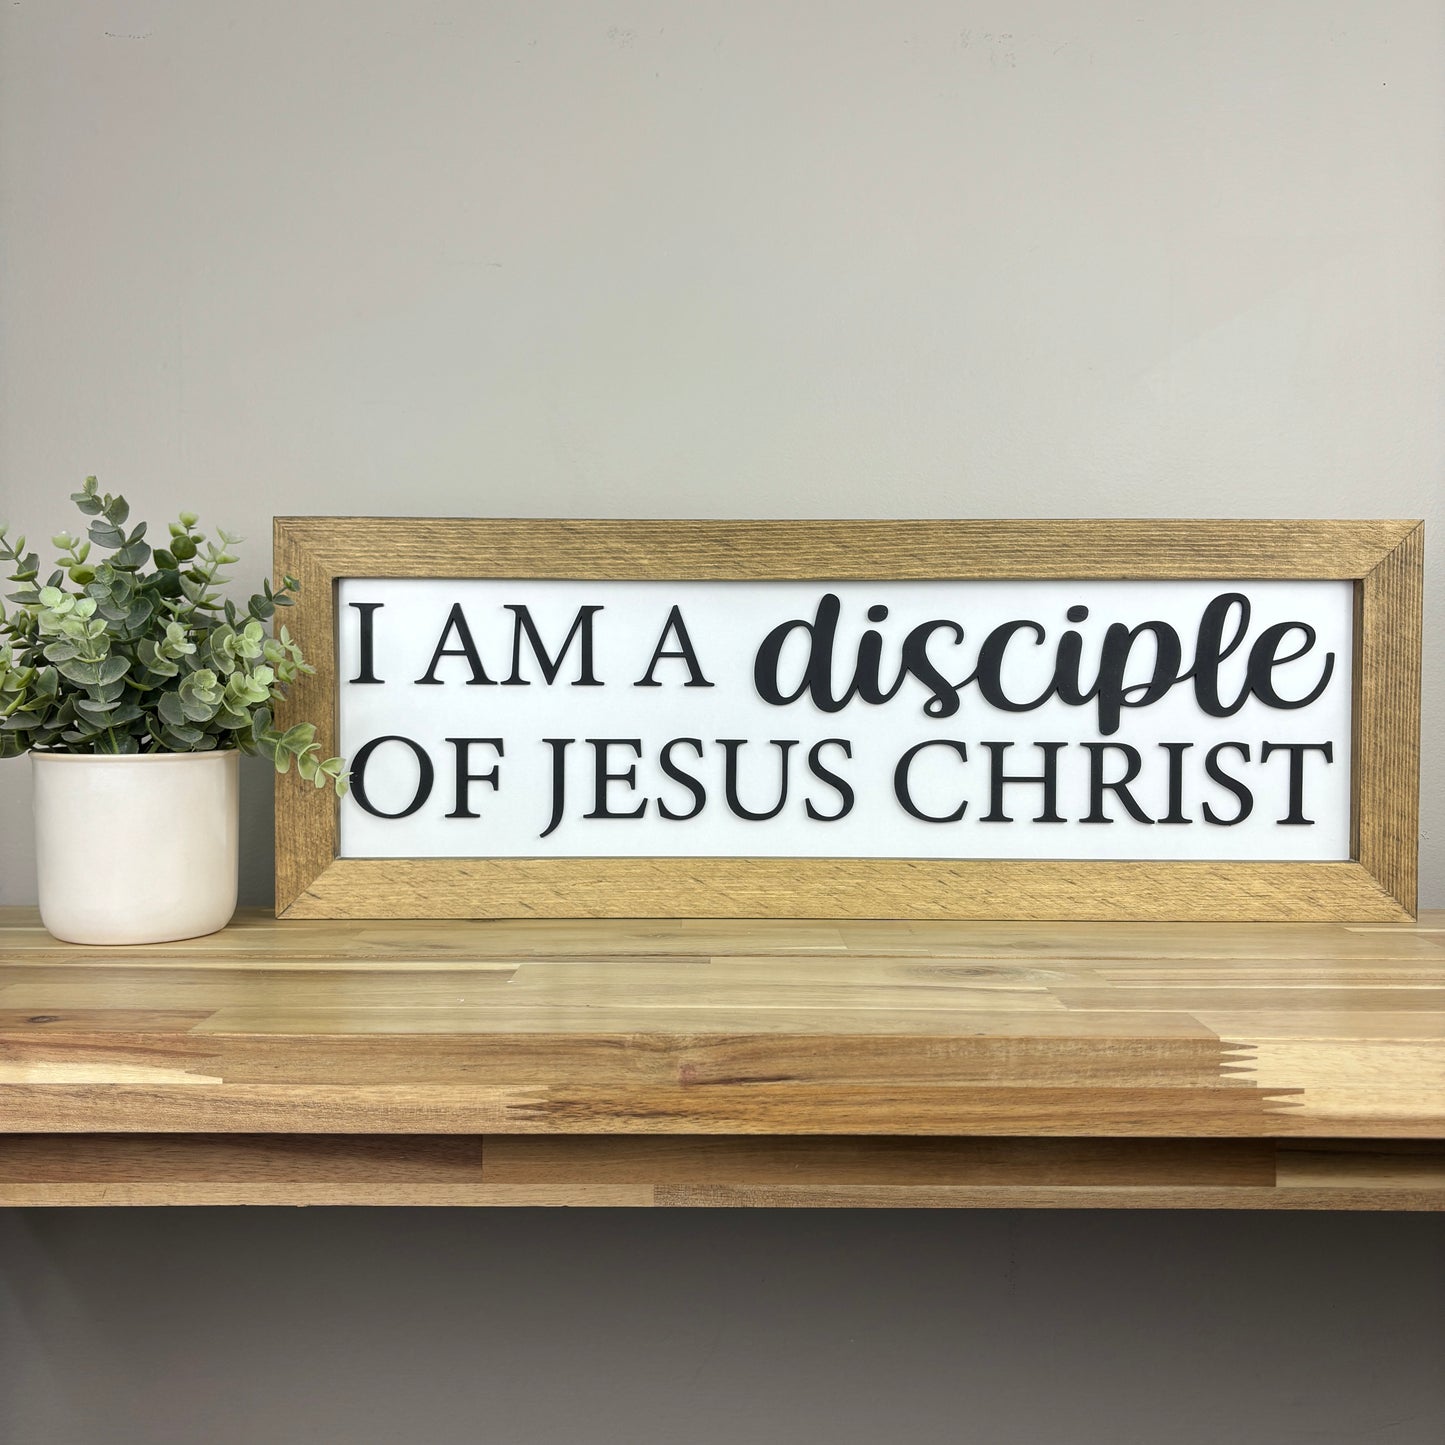 I Am A Disciple of Christ | 8x23 inch Wood Framed Sign